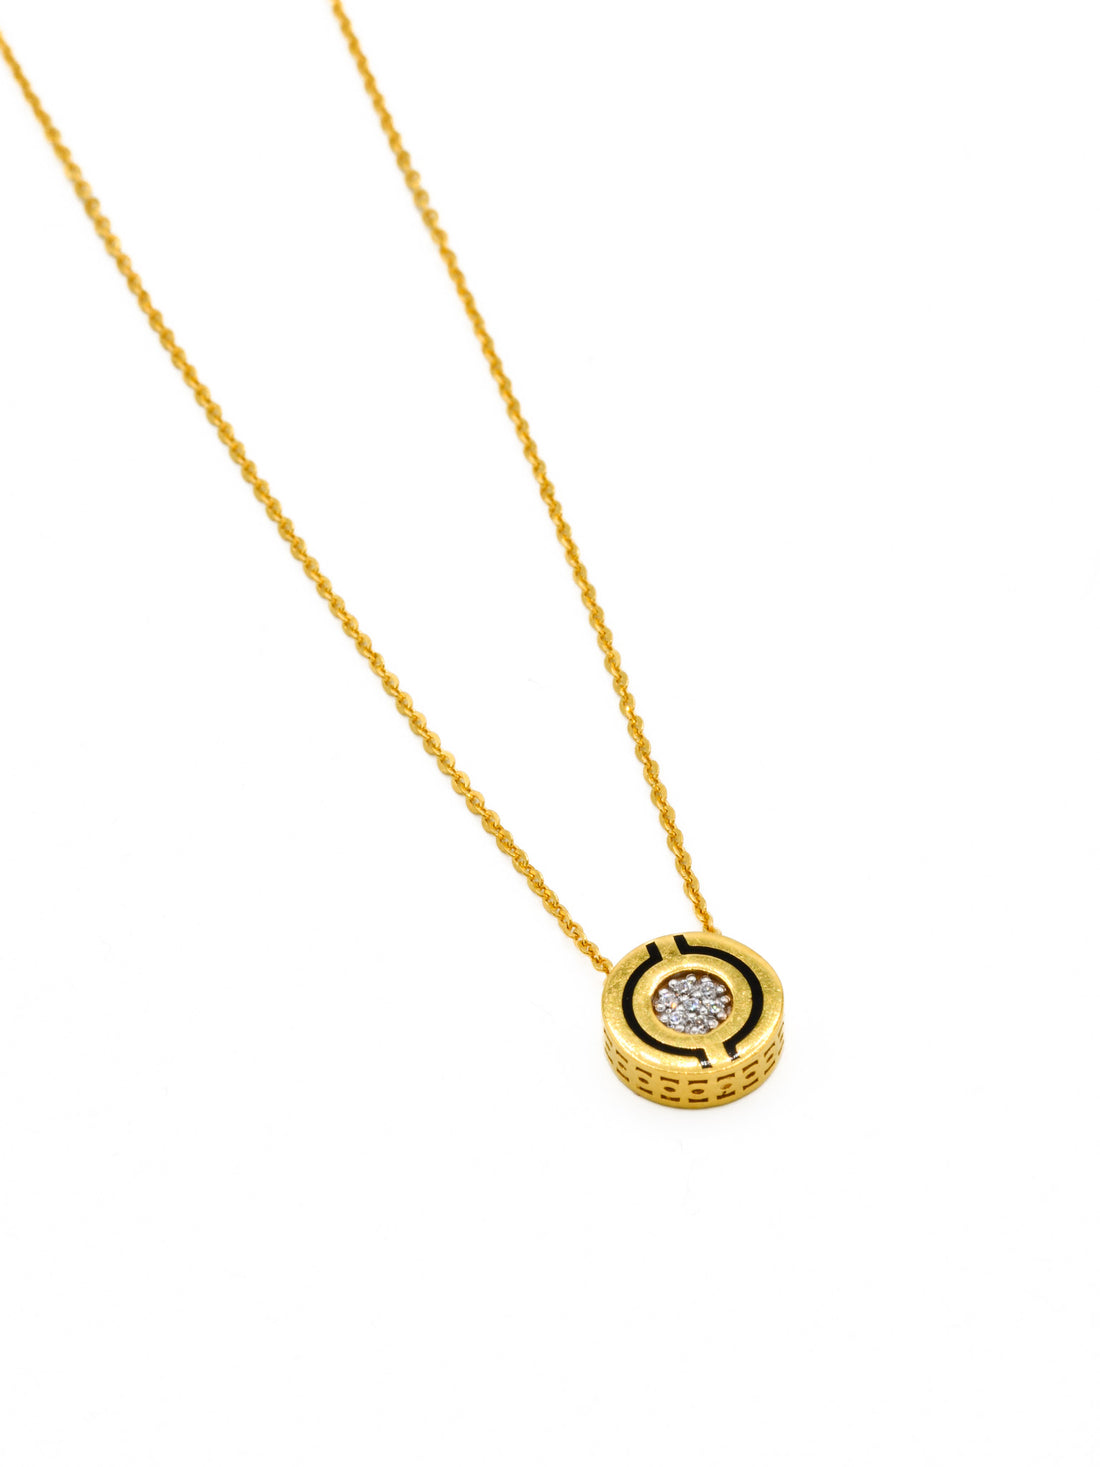 22ct Gold CZ Fancy Chain - Roop Darshan